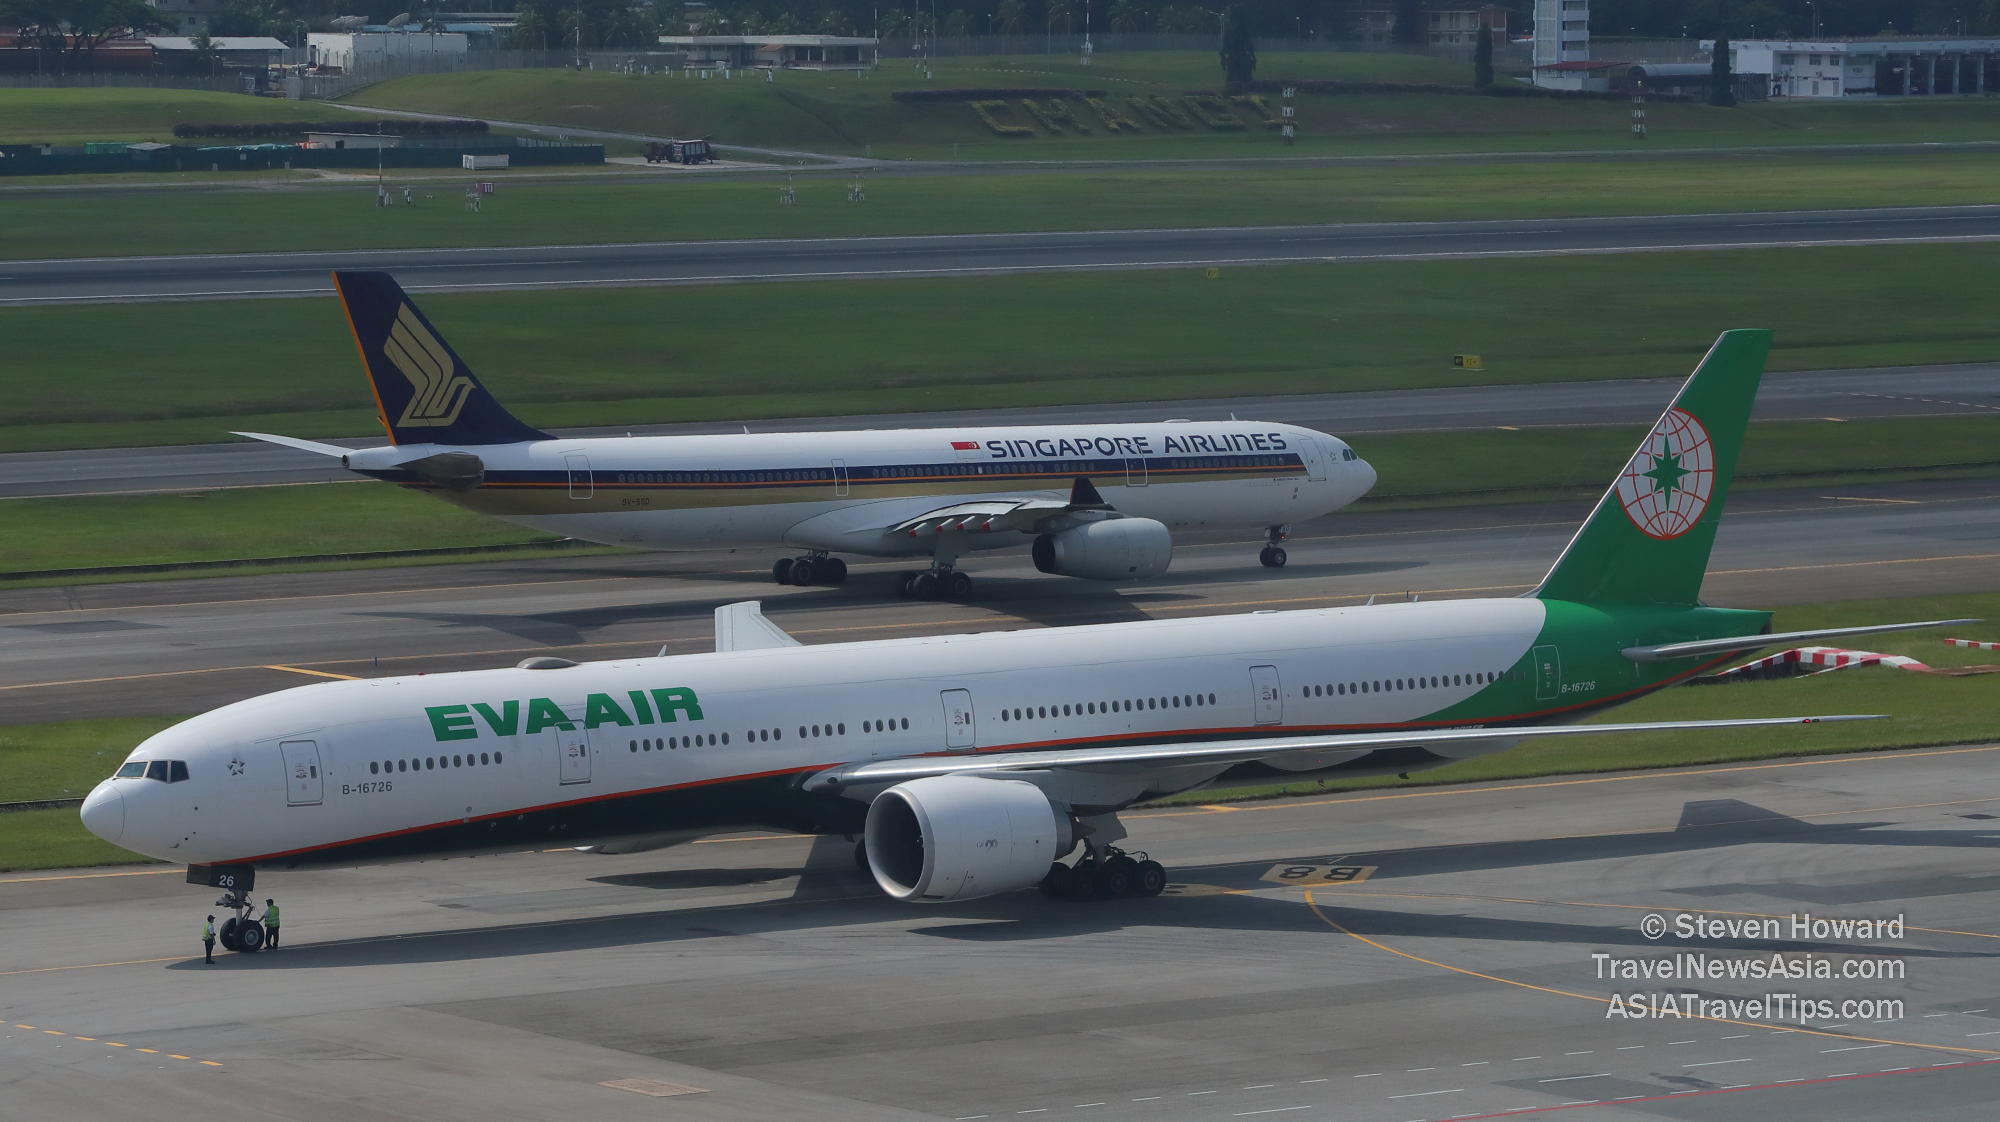 EVA Air Boeing 777-300ER reg: b-16726 and Singapore Airlines aircraft at Changi Airport. Picture by Steven Howard of TravelNewsAsia.com from a Runway Room at Crowne Plaza Changi Airport Hotel. Click to enlarge.